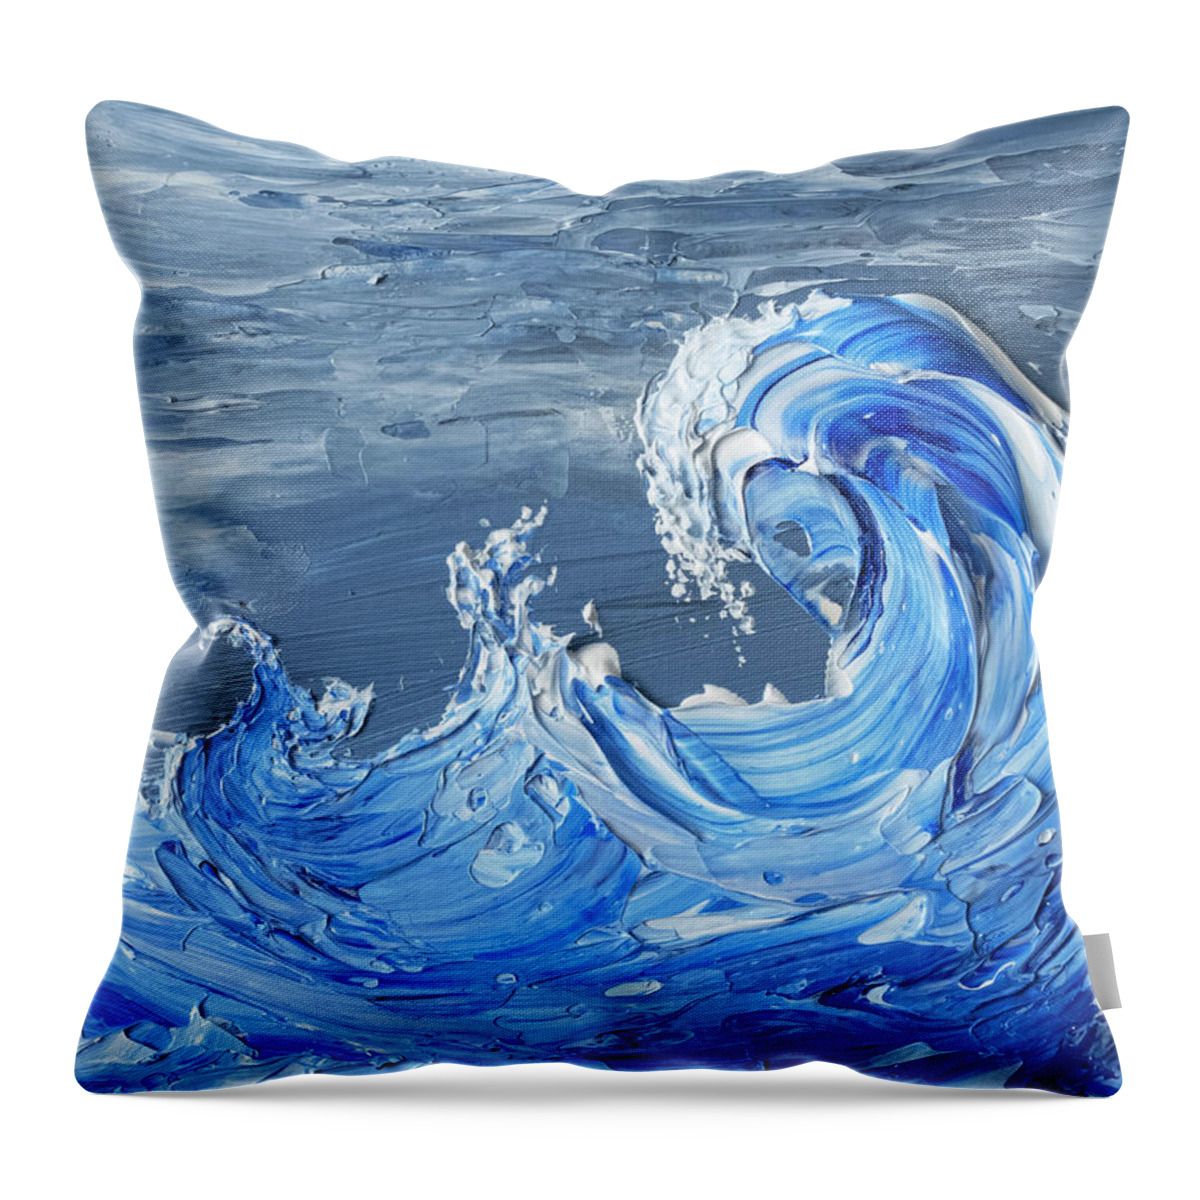 Hawaii Throw Pillow featuring the painting Maui Waves by Darice Machel McGuire